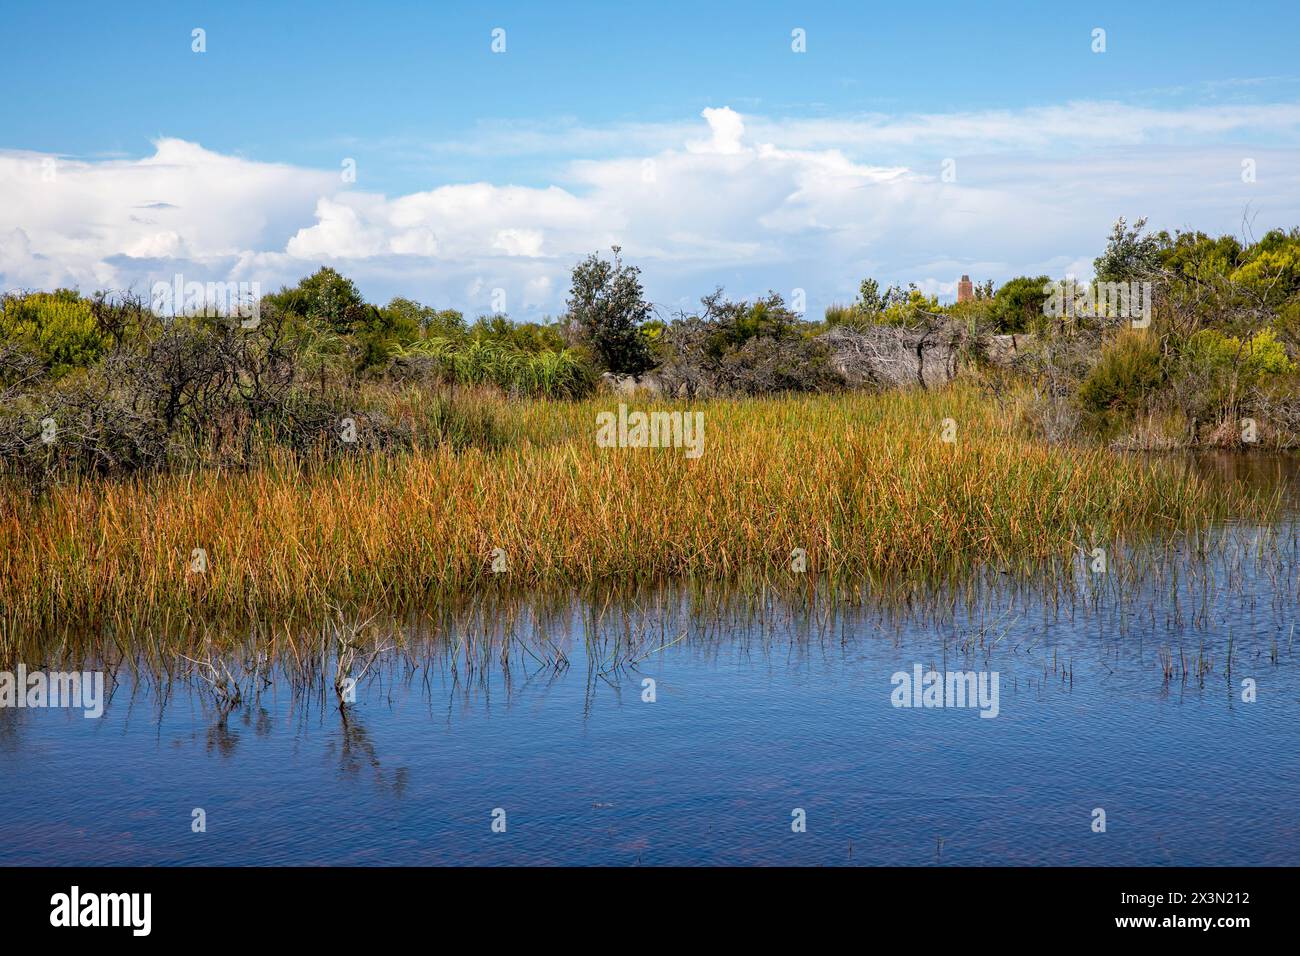 Old Quarry swamp on North Head Manly, located near Shelly beach lookout on the North head road walking trail, Sydney,NSW,Australia Stock Photo